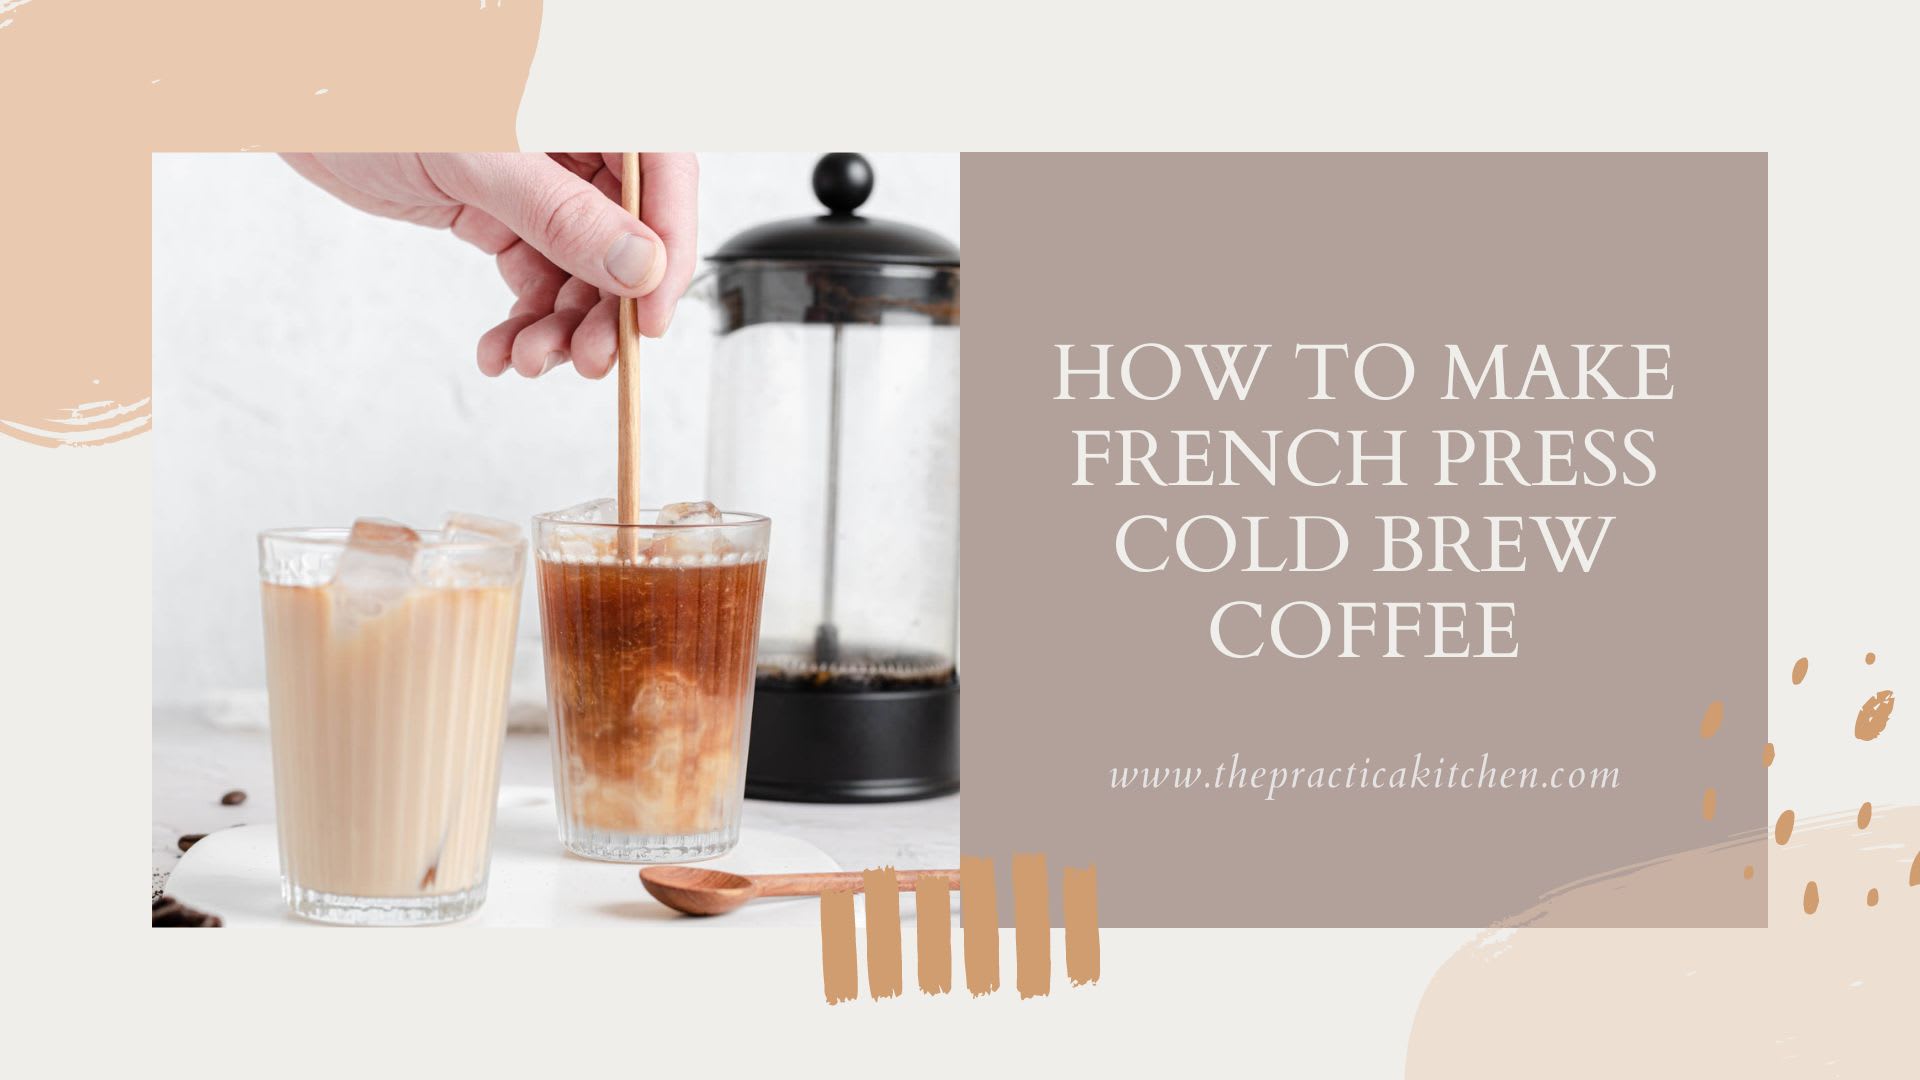 How to Use a French Press to Make Coffee, Tea, Broth, and More